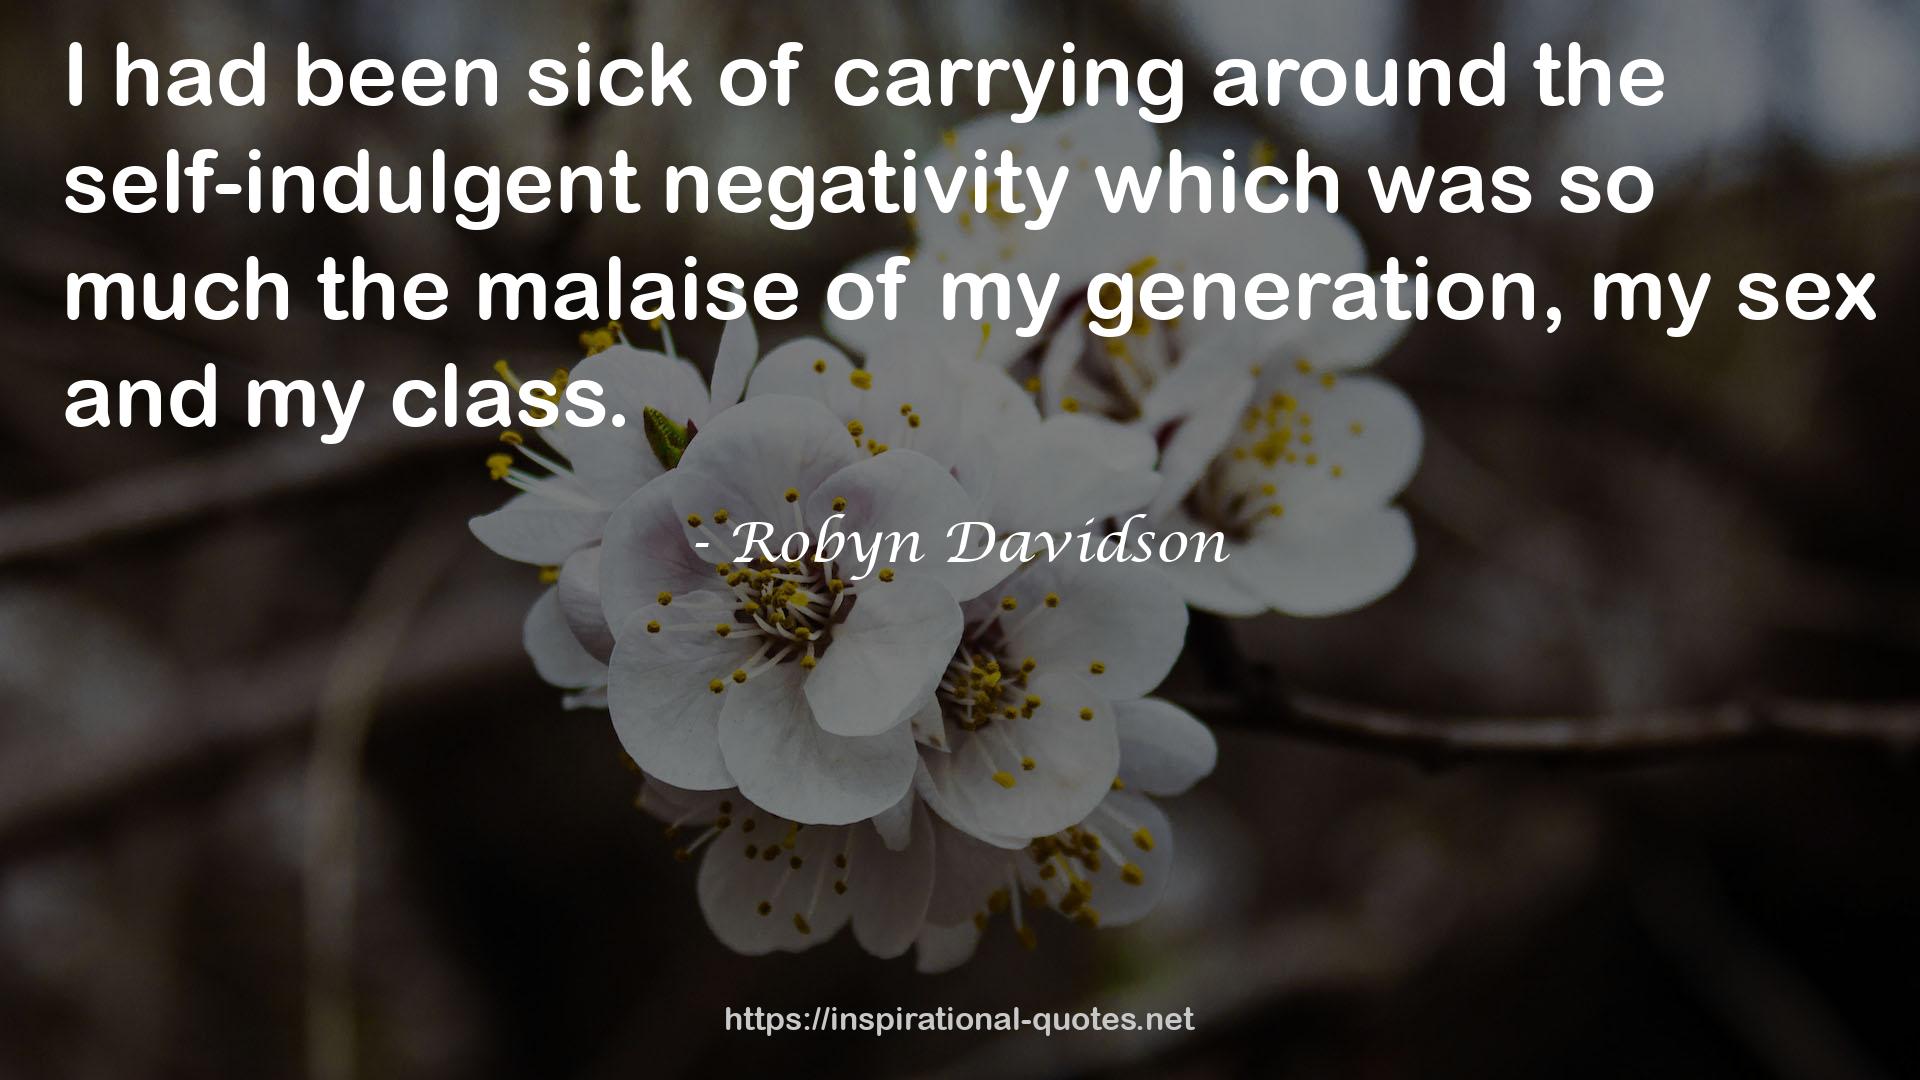 Robyn Davidson QUOTES